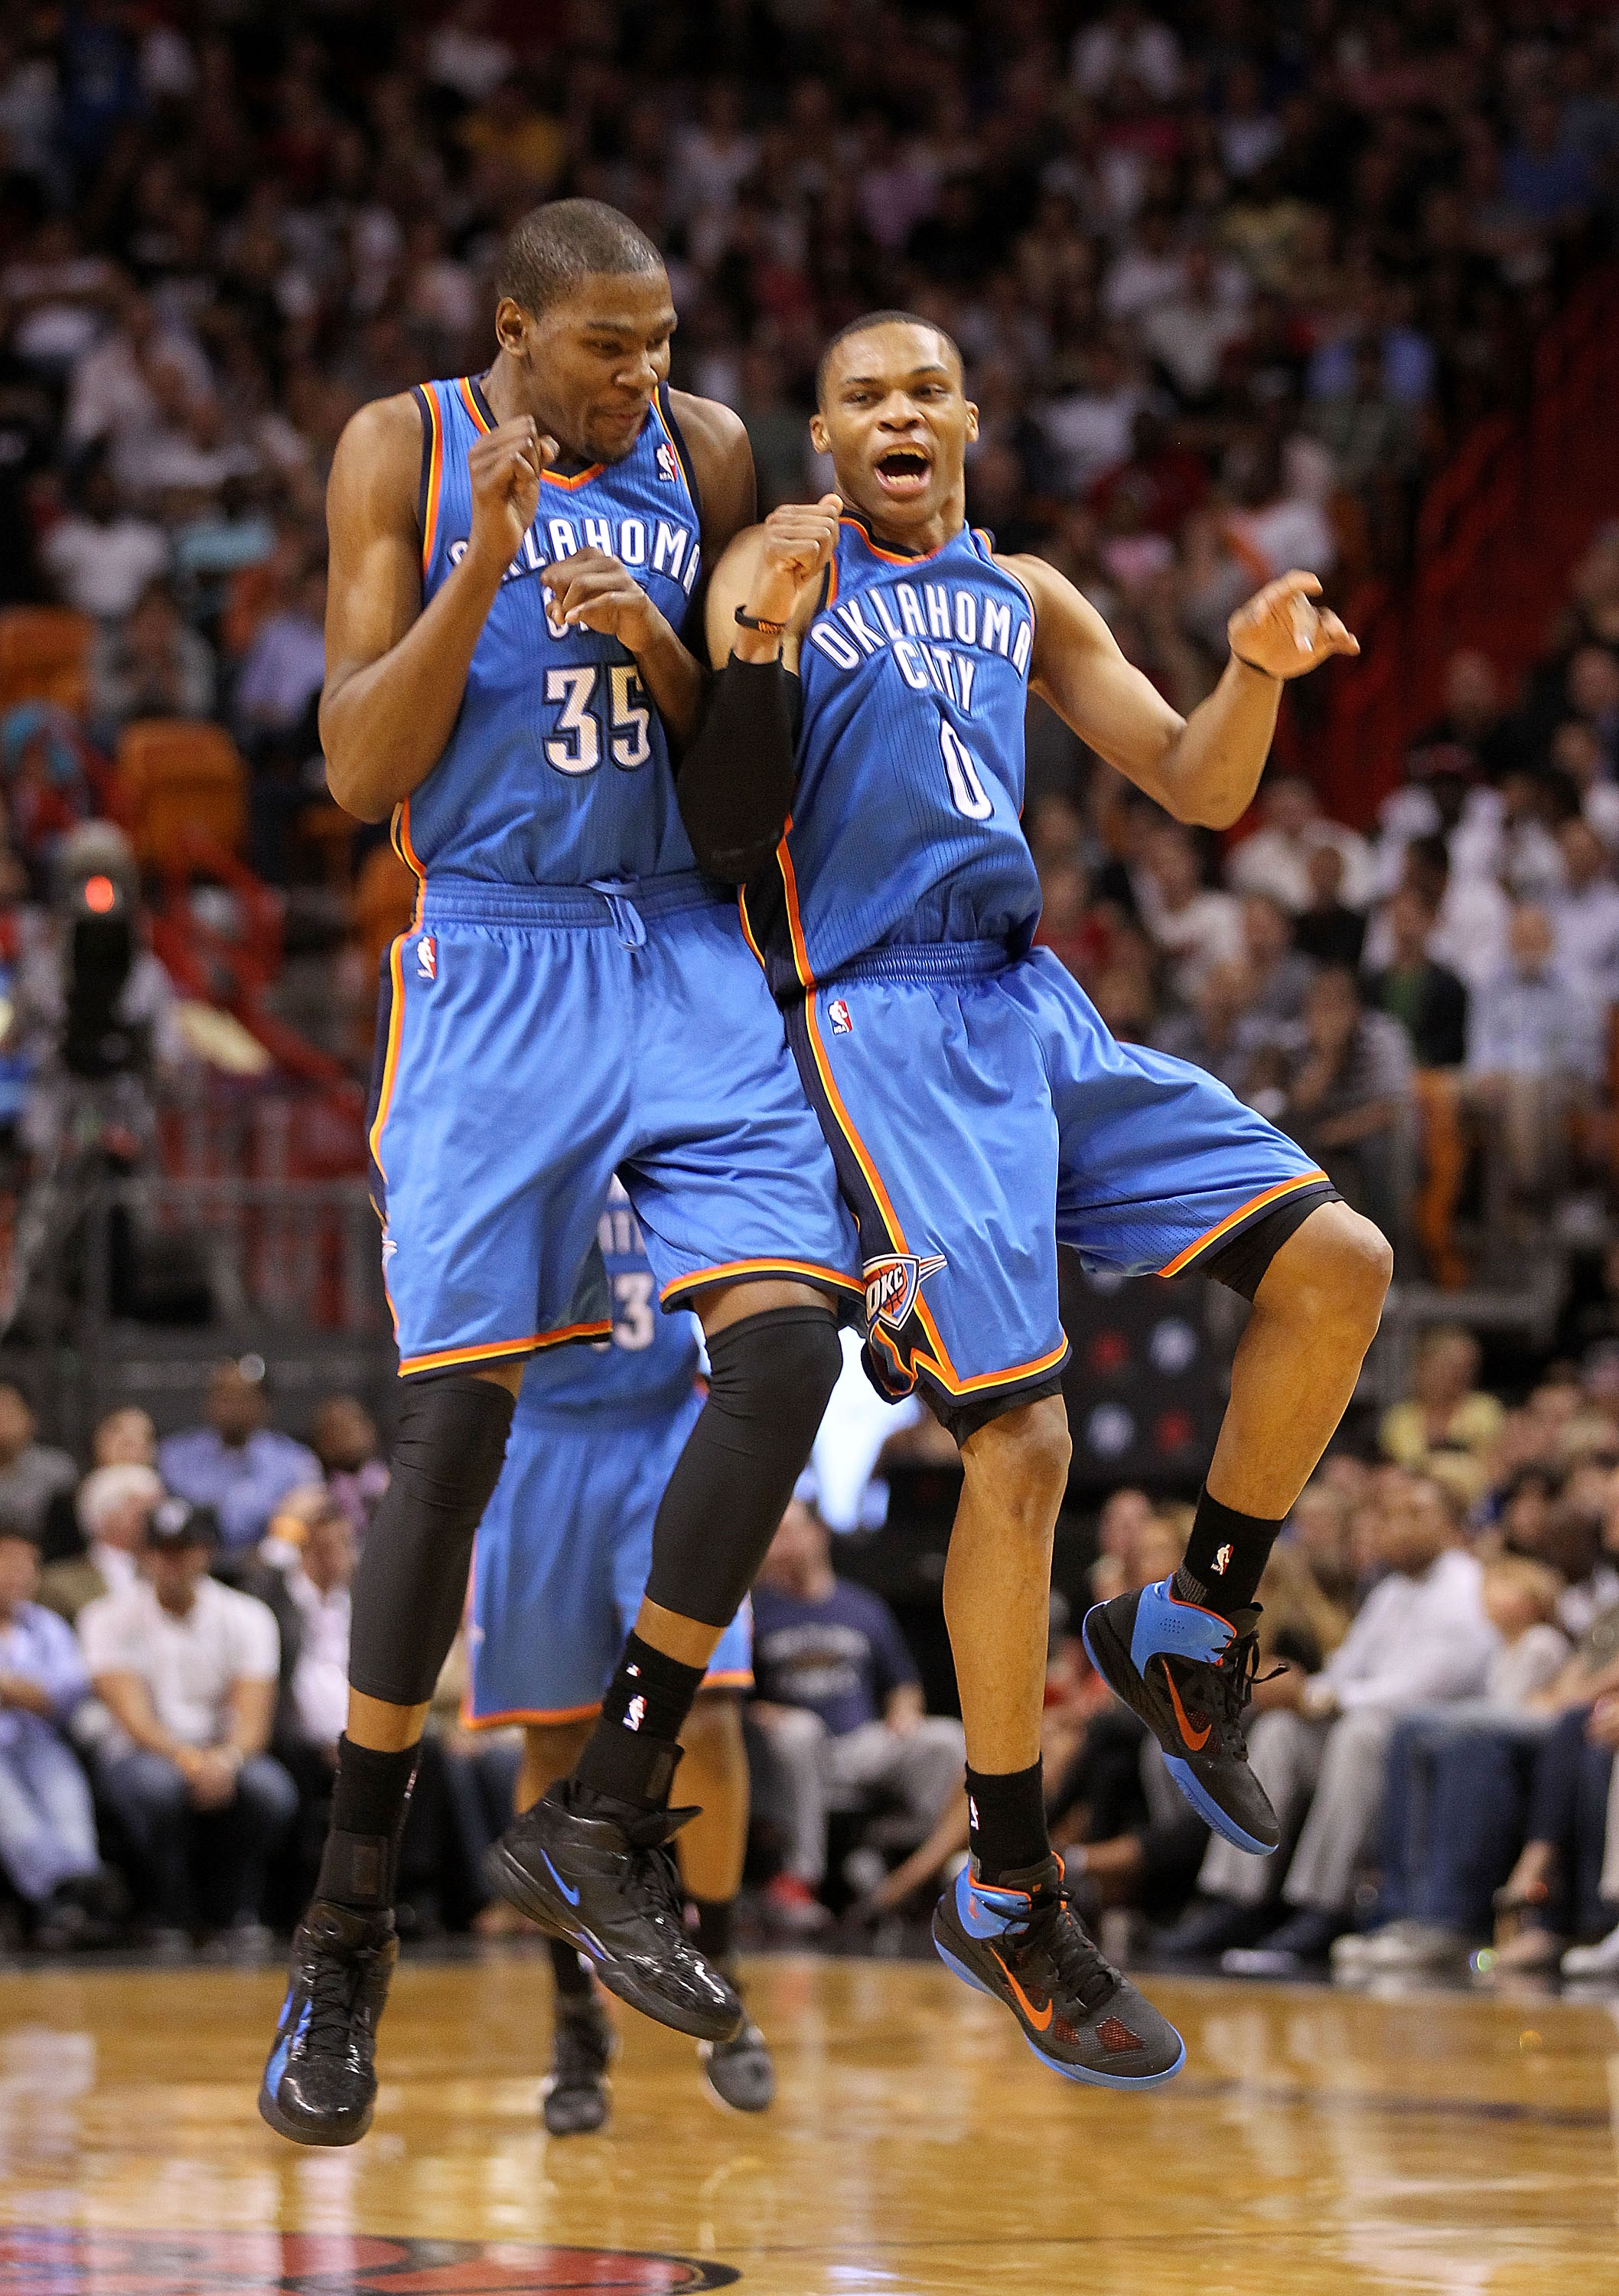 MIAMI, FL - MARCH 16:  Kevin Durant #35 and Russell Westbrook #0 of the Oklahoma City Thunder celebrate after a 3 pointer during a game against the Miami Heat at American Airlines Arena on March 16, 2011 in Miami, Florida. NOTE TO USER: User expressly ack